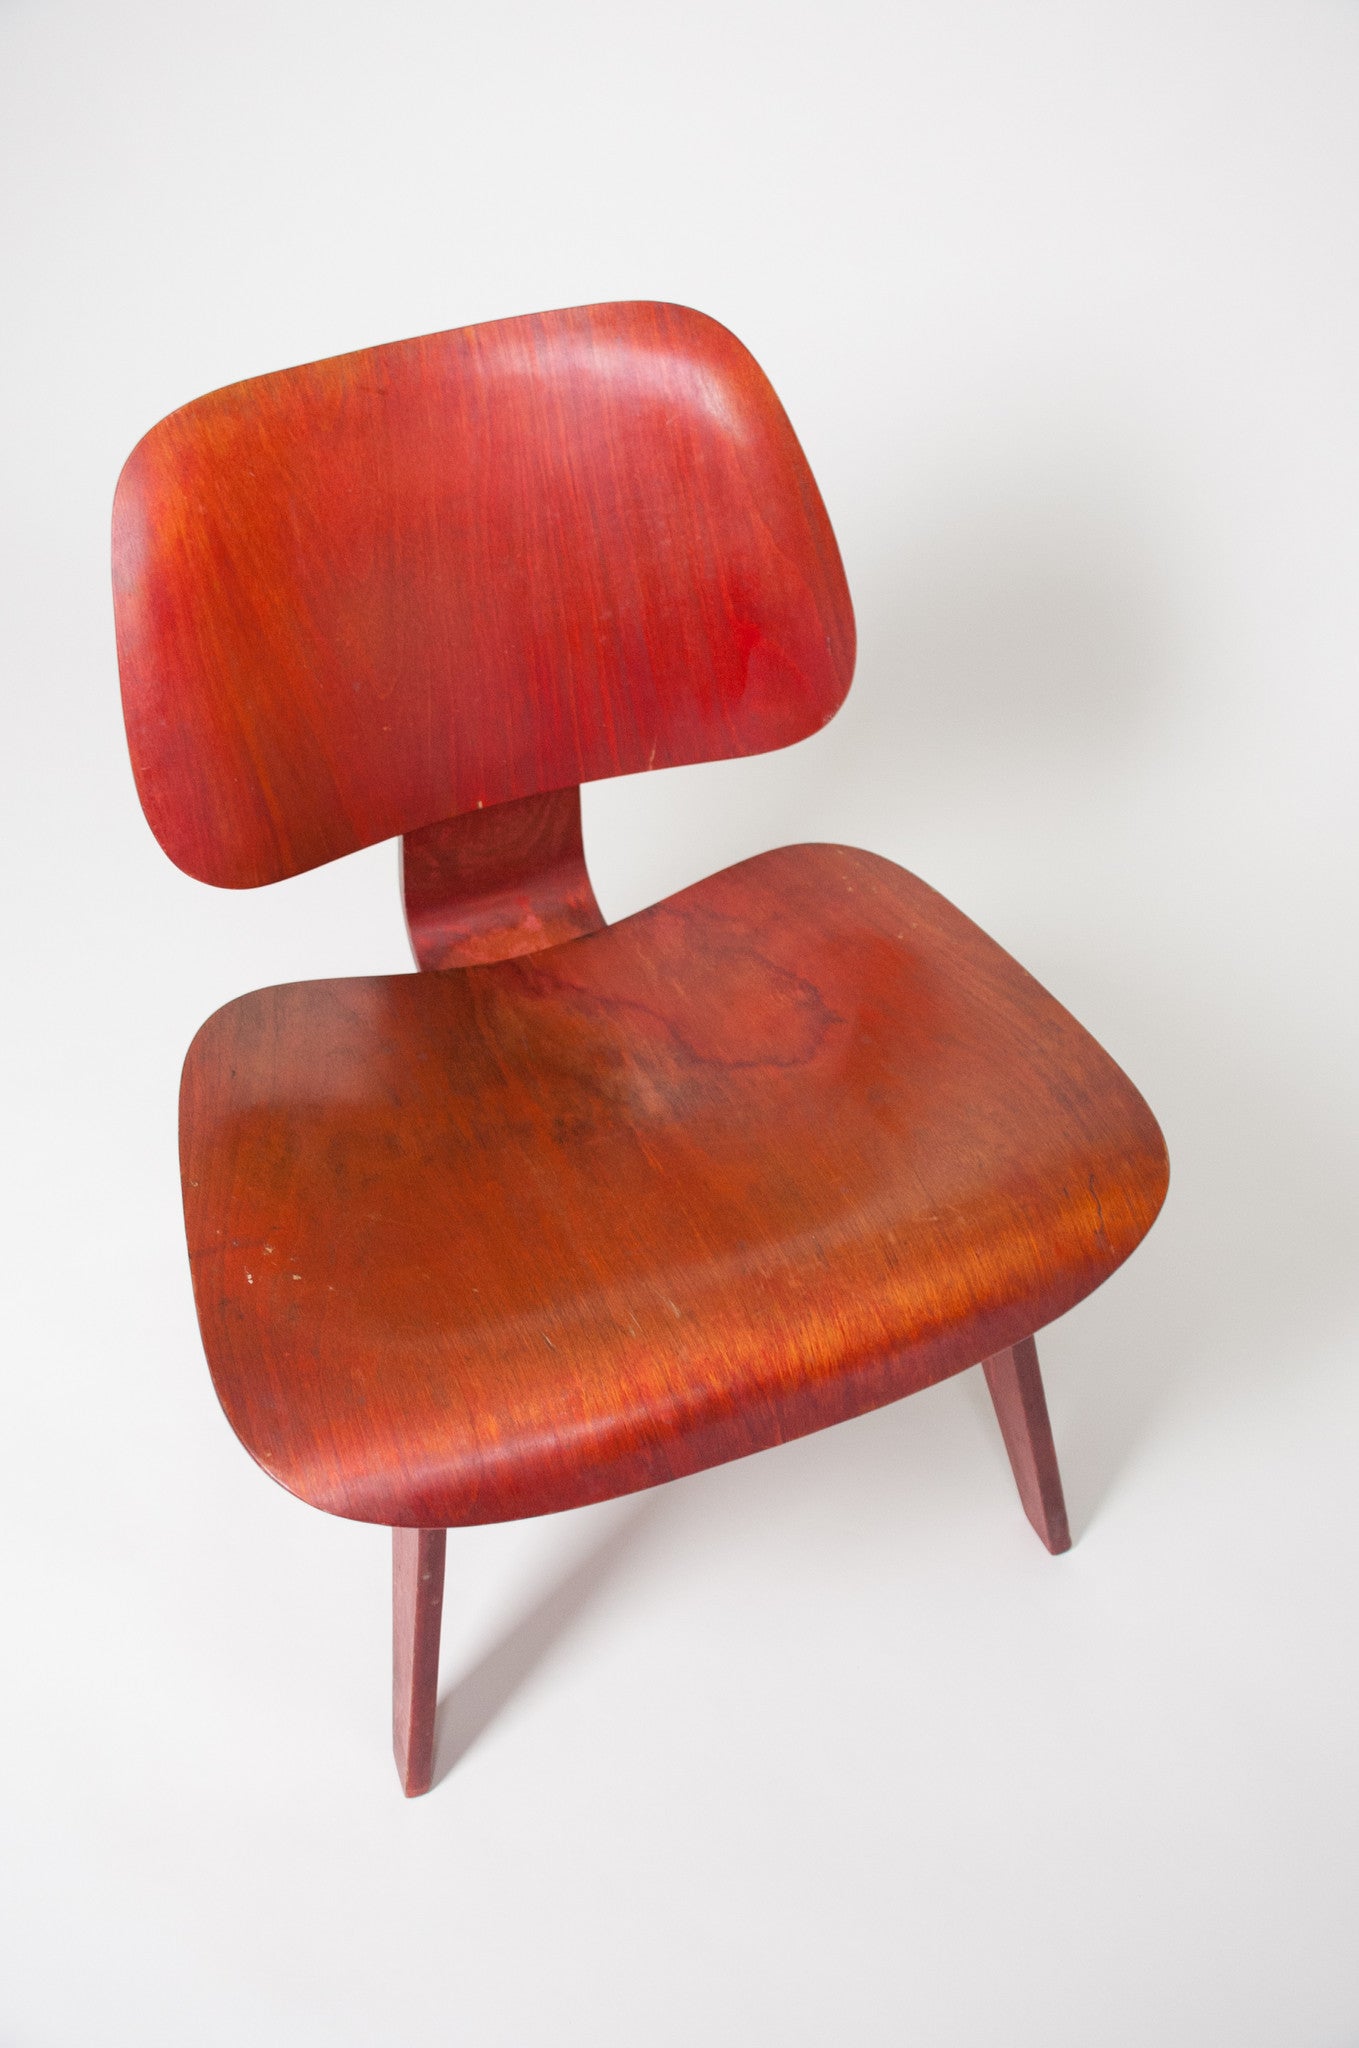 SOLD Eames Herman Miller Early 50's LCW Early Red Aniline, All Original Lounge Chair